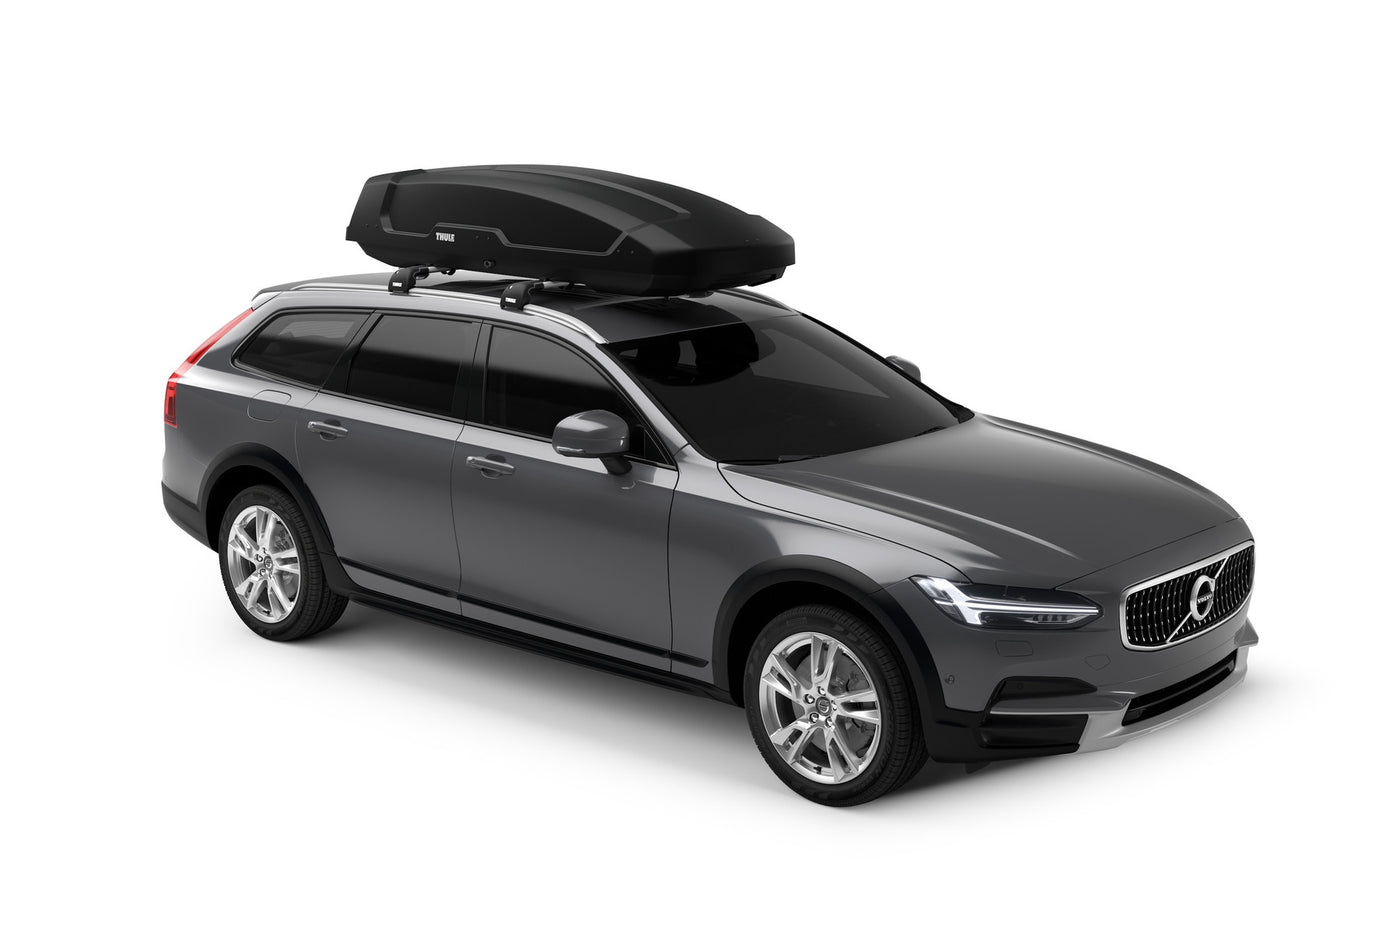 Thule Cargo Box - Overland Outfitters - Vancouver, BC